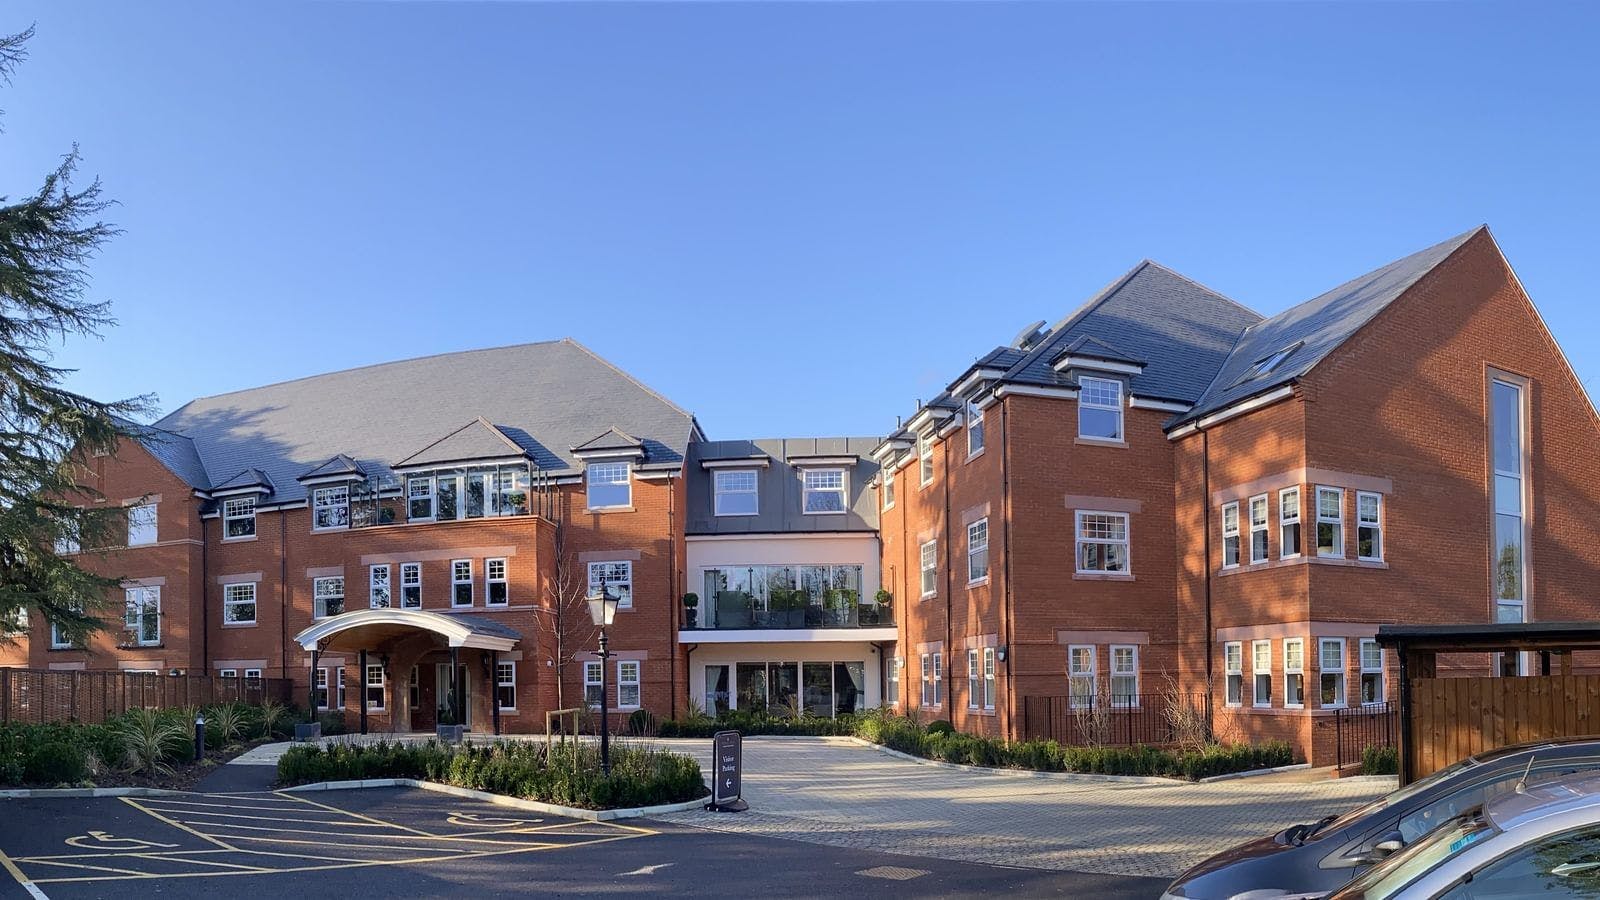 Exterior at Horsell Lodge Care Home in Woking, Surrey